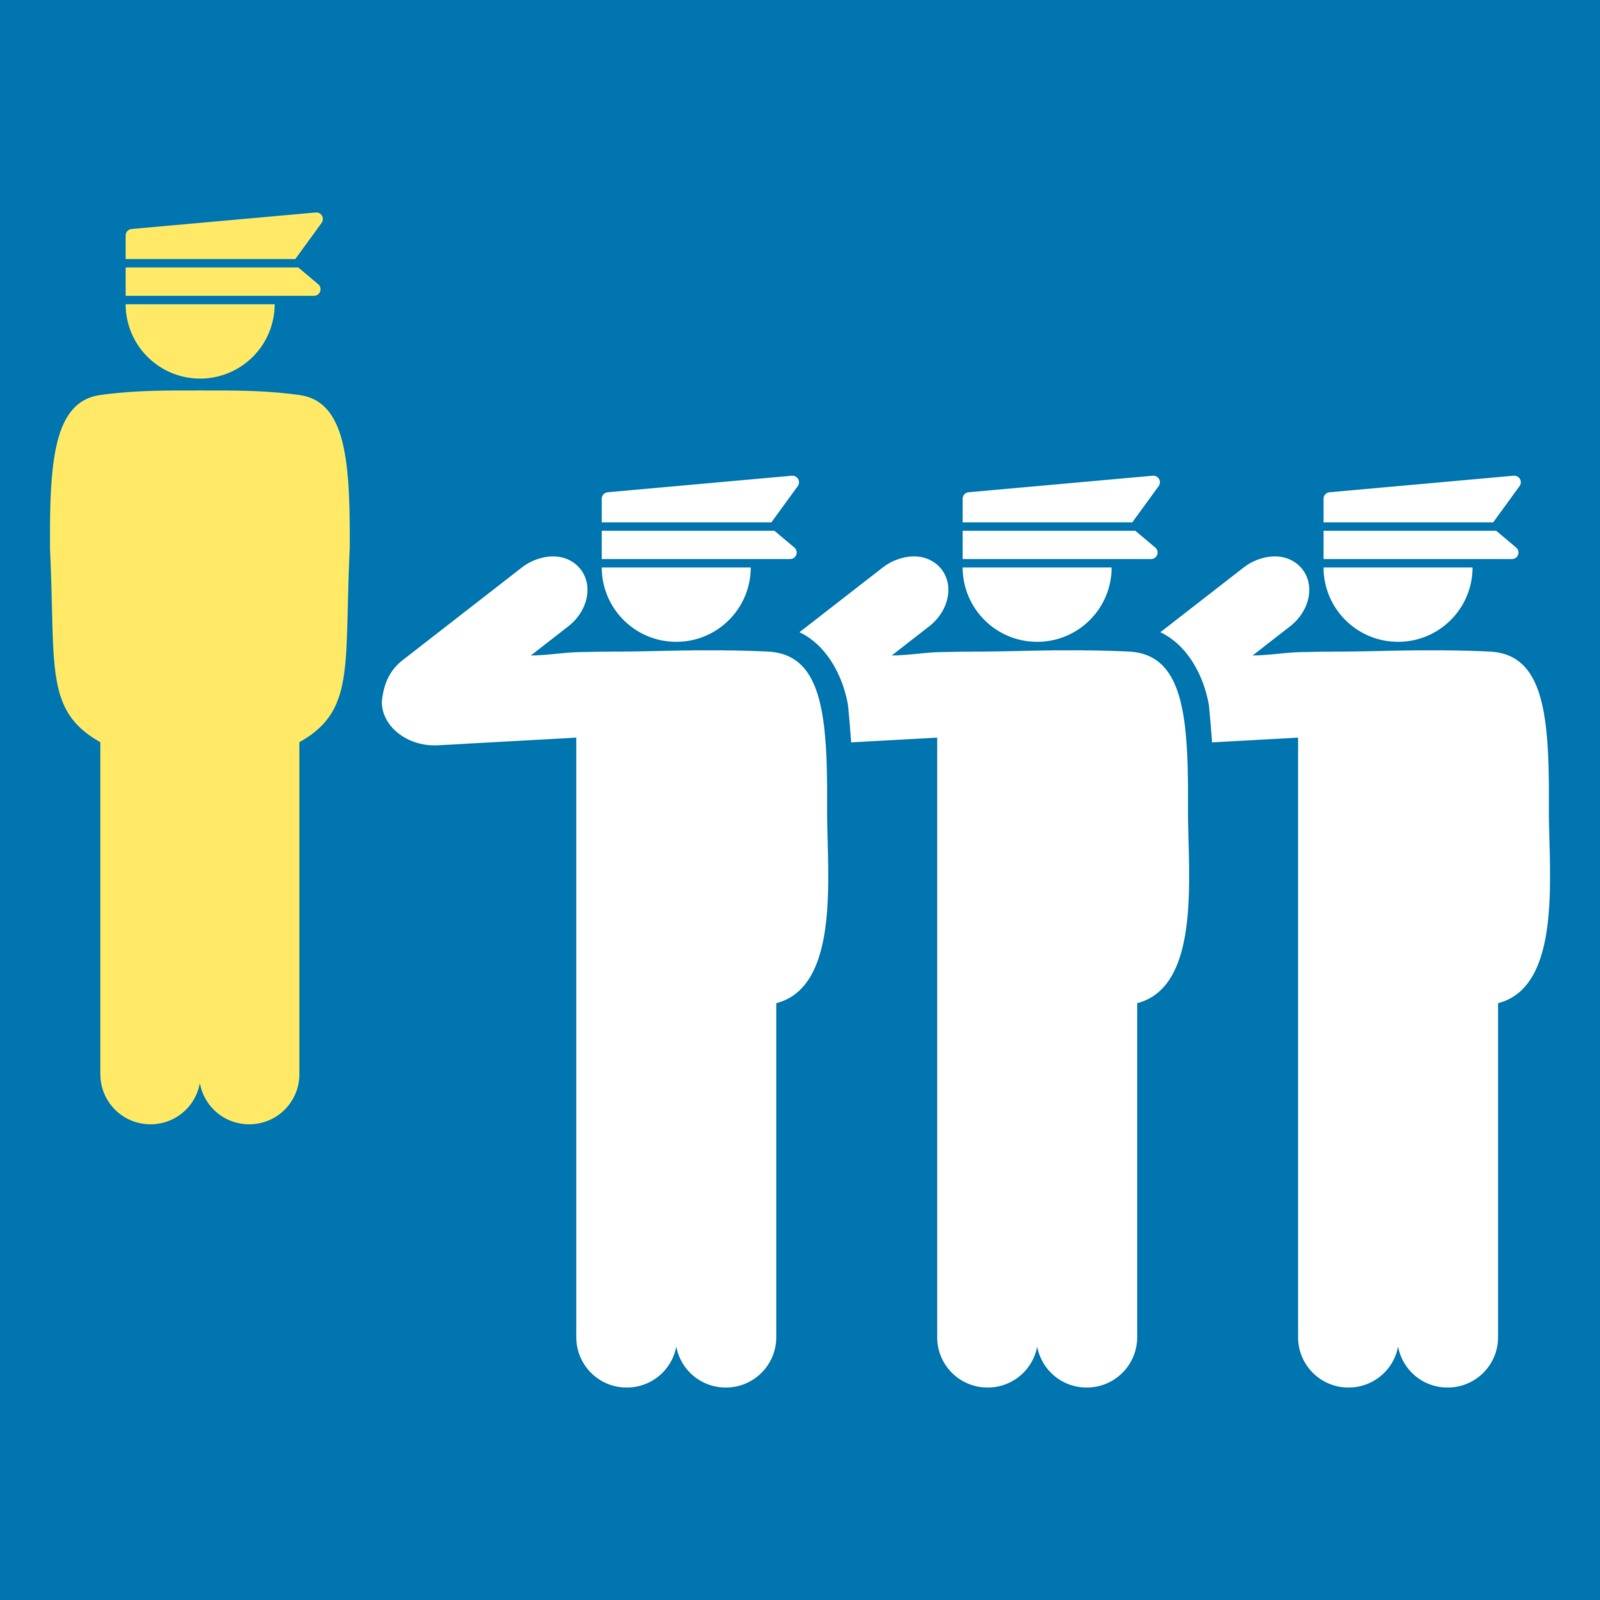 Army icon. This flat vector symbol uses yellow and white colors, rounded angles, and isolated on a blue background.